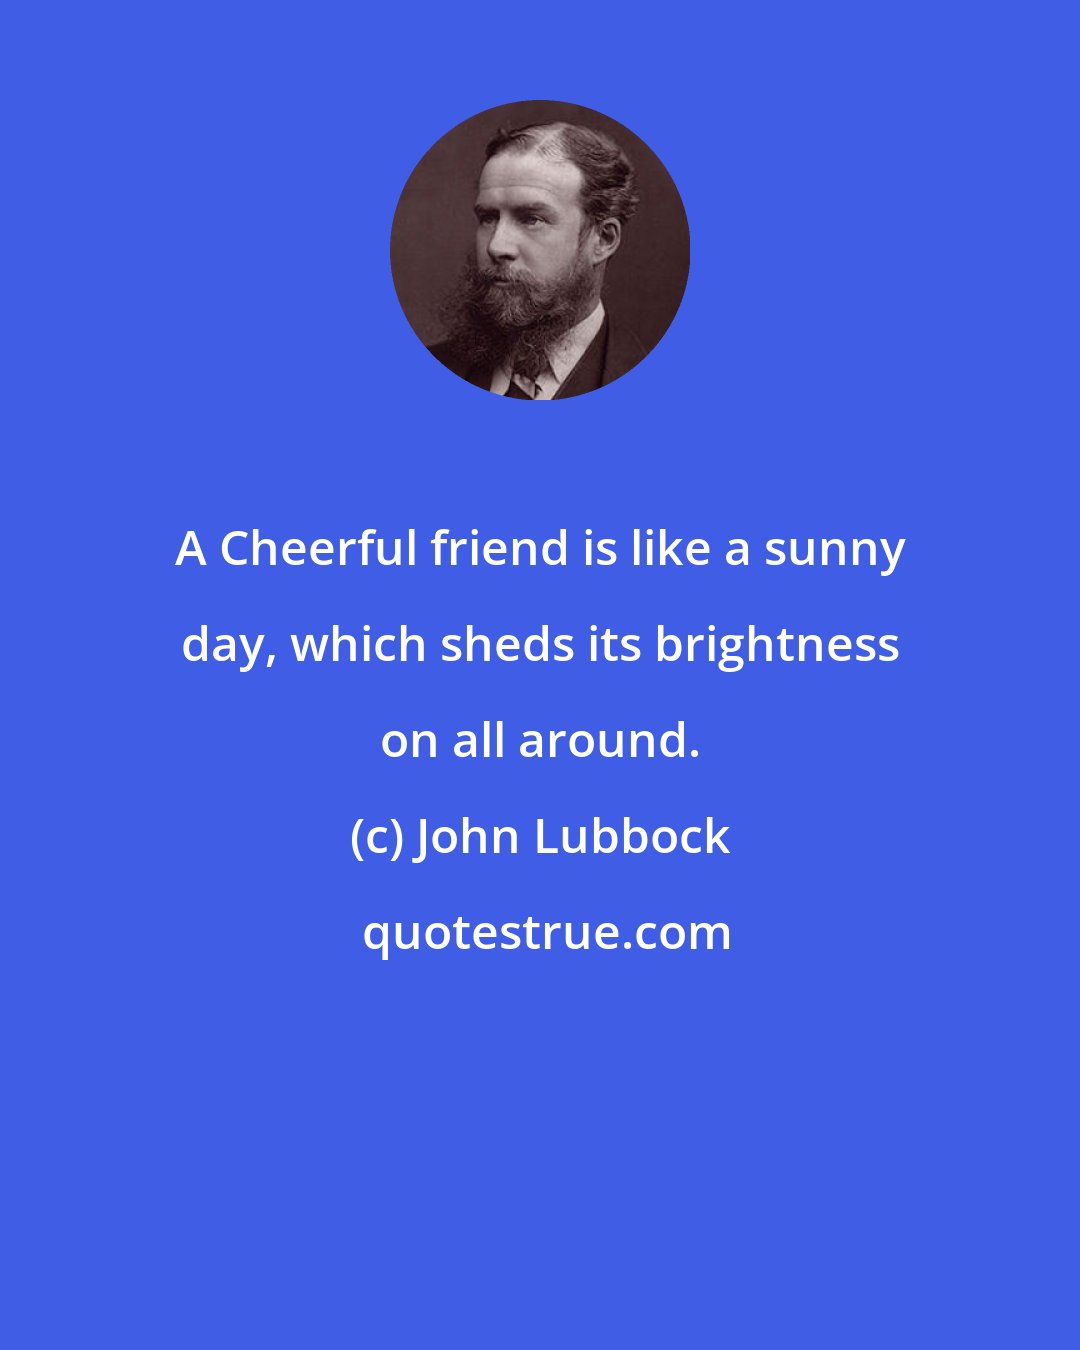 John Lubbock: A Cheerful friend is like a sunny day, which sheds its brightness on all around.